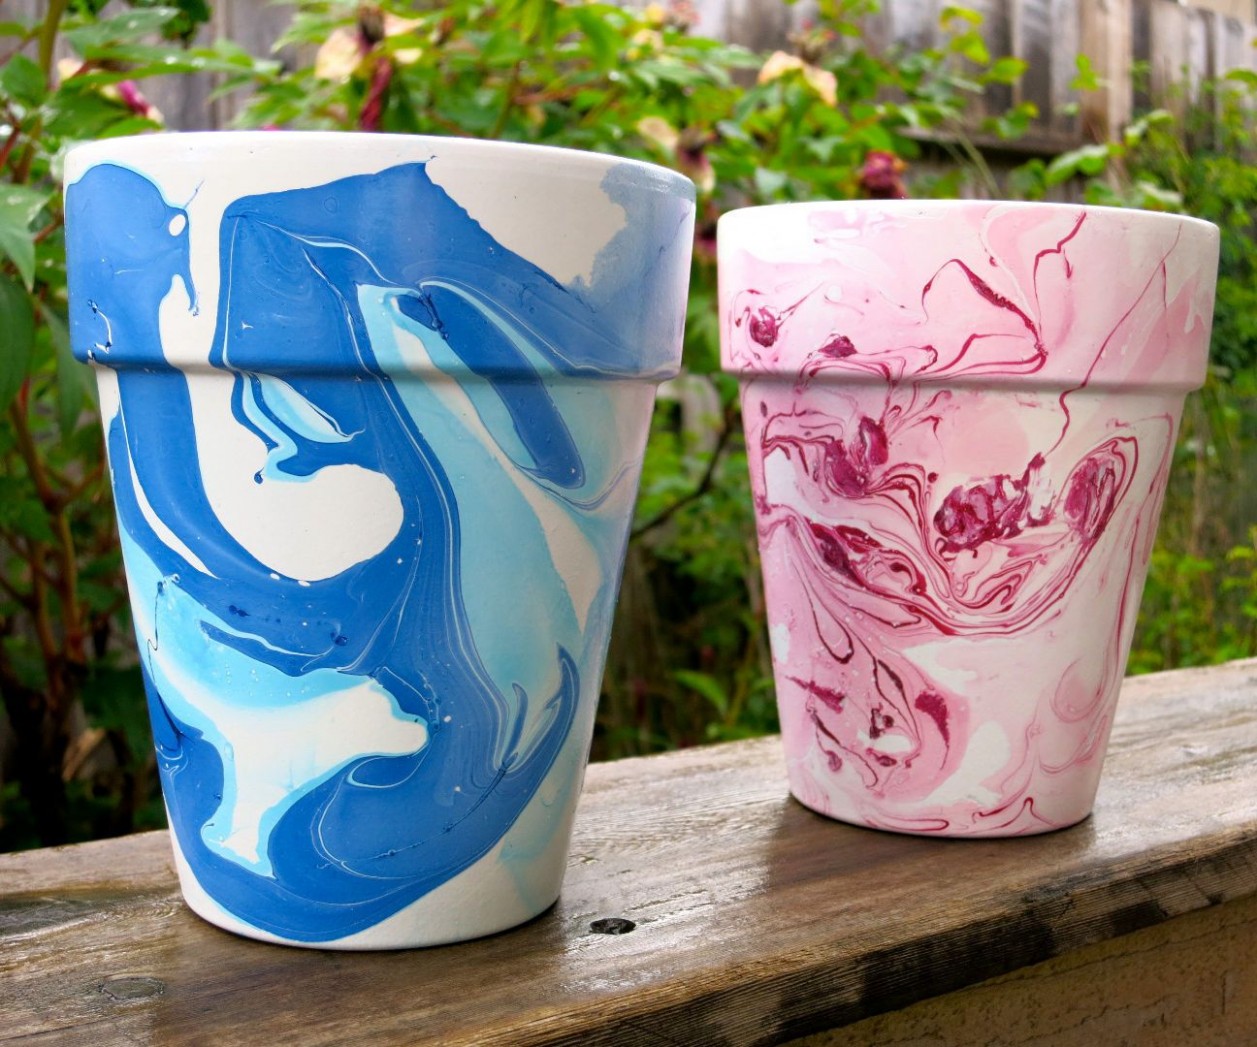 Nail Polish Marbled Flower Pots | Cool Ideas To Make/try ..